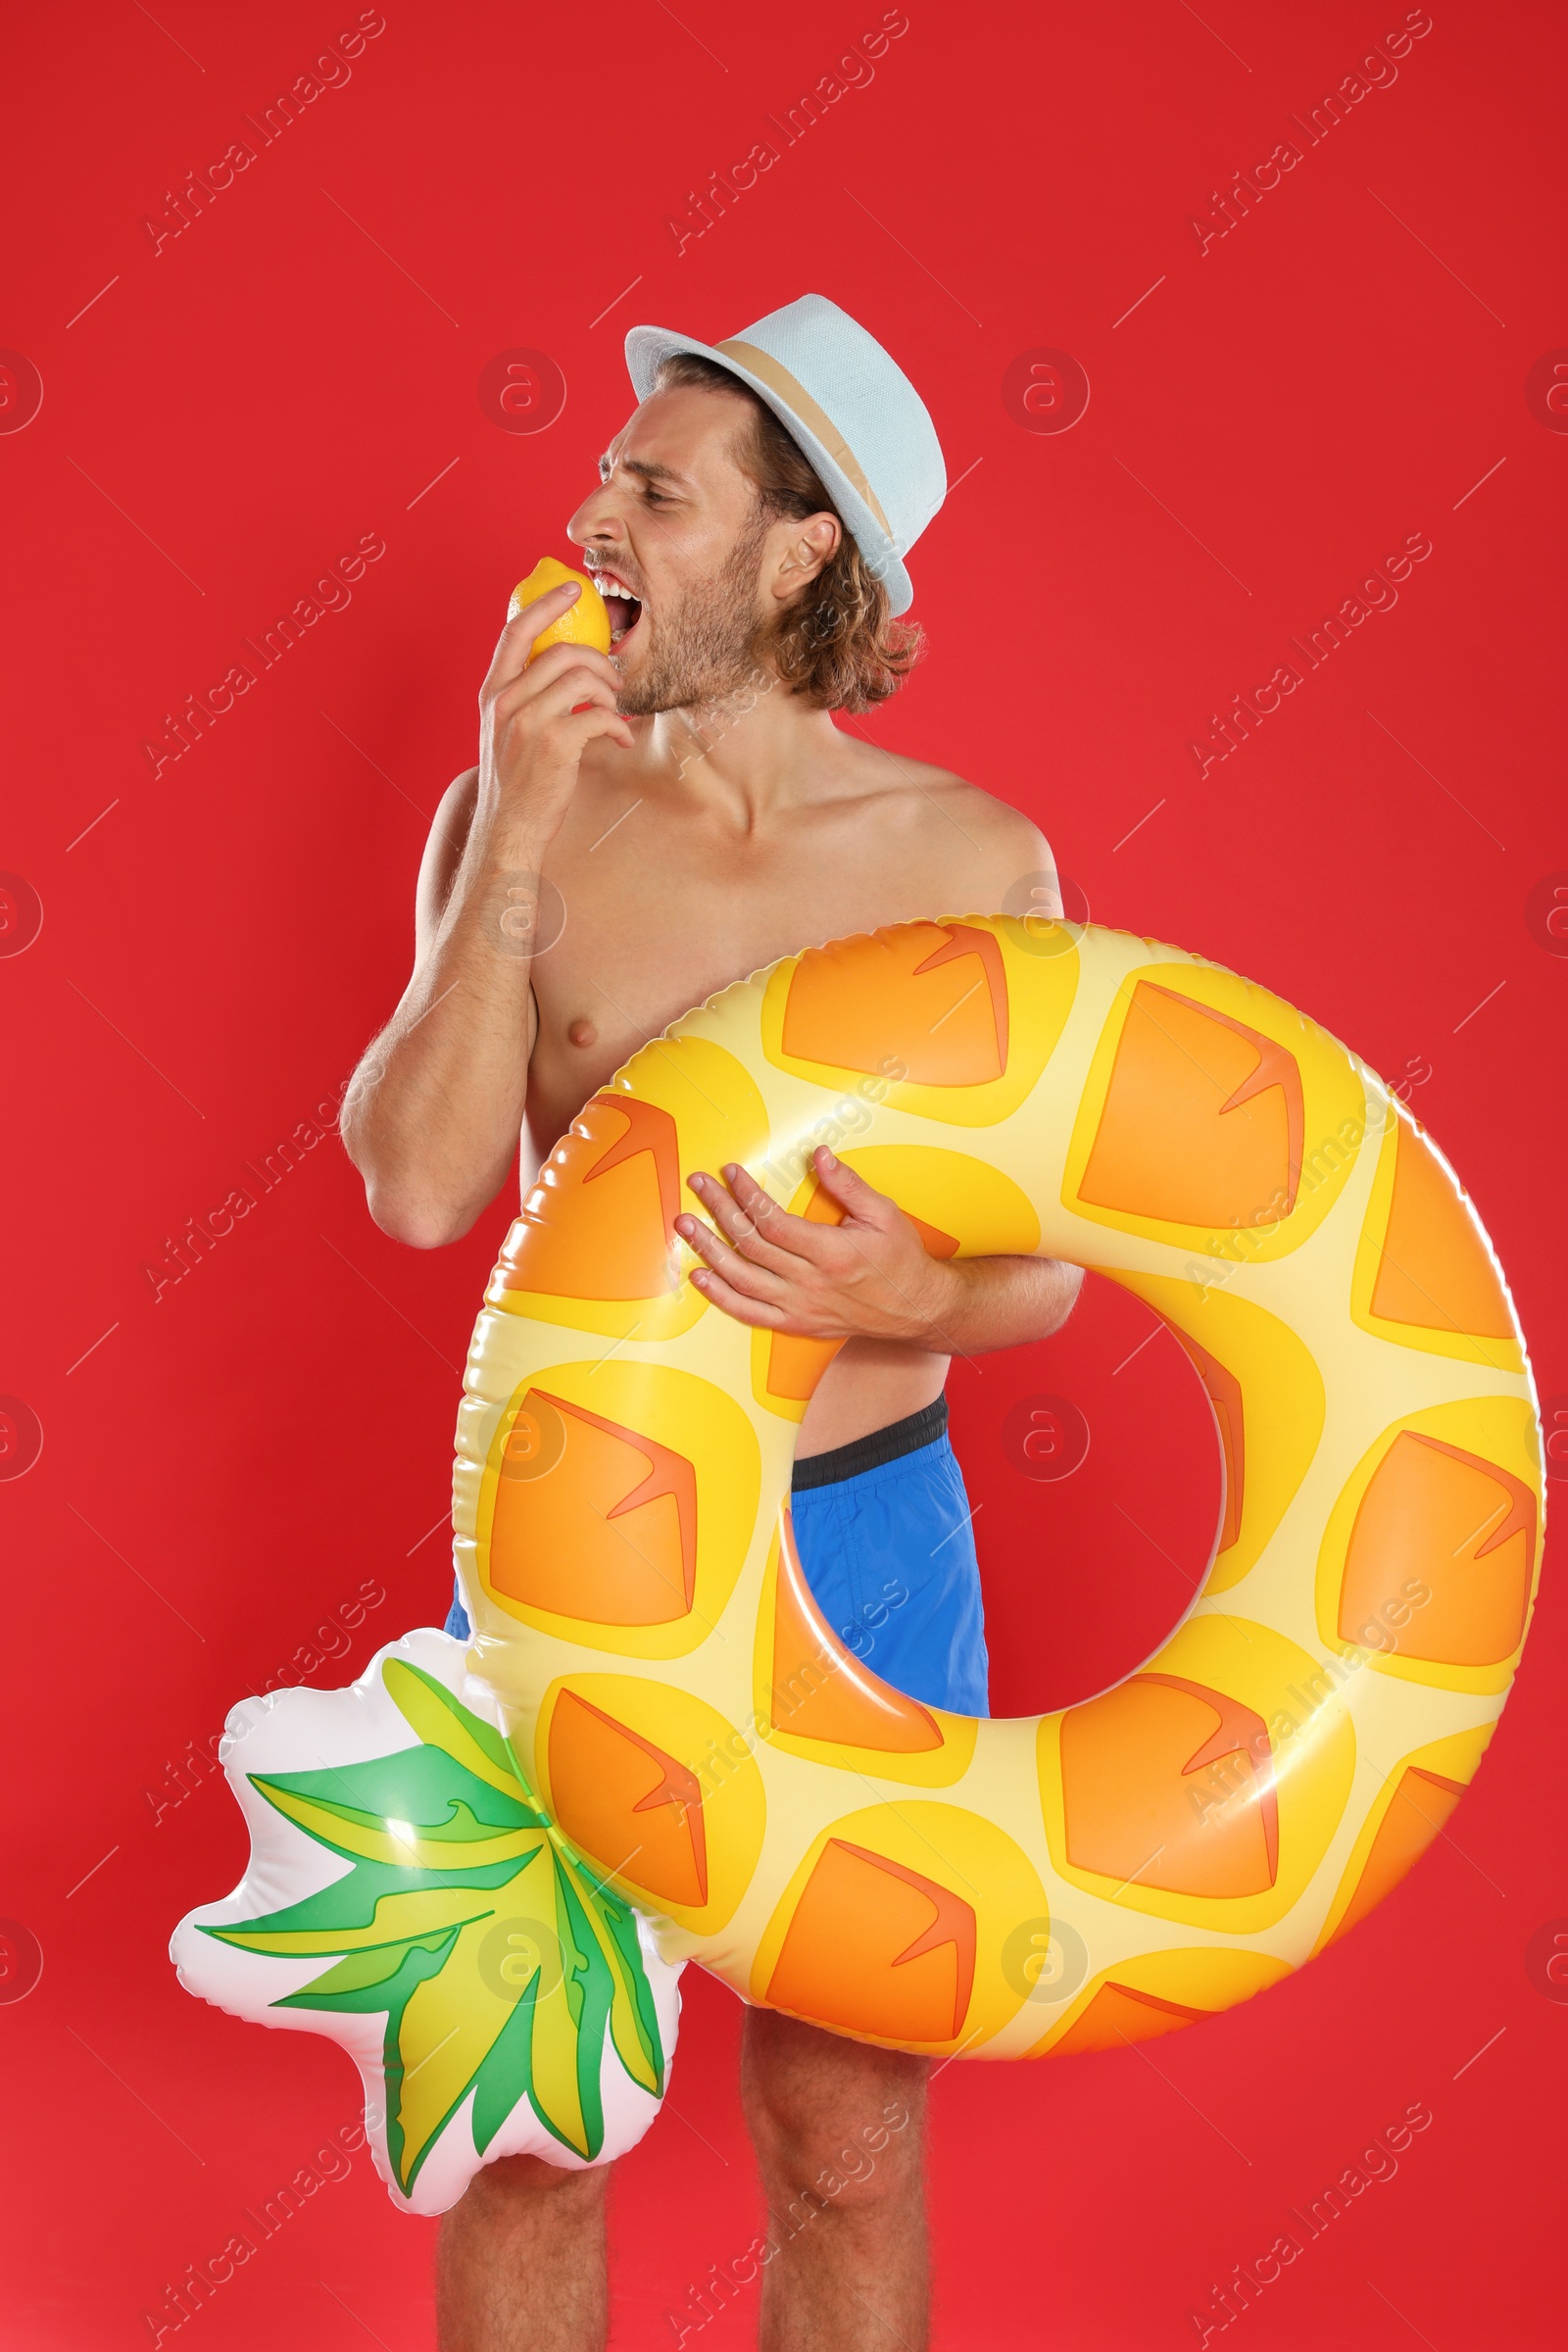 Photo of Attractive young man in swimwear with pineapple inflatable ring eating lemon on red background